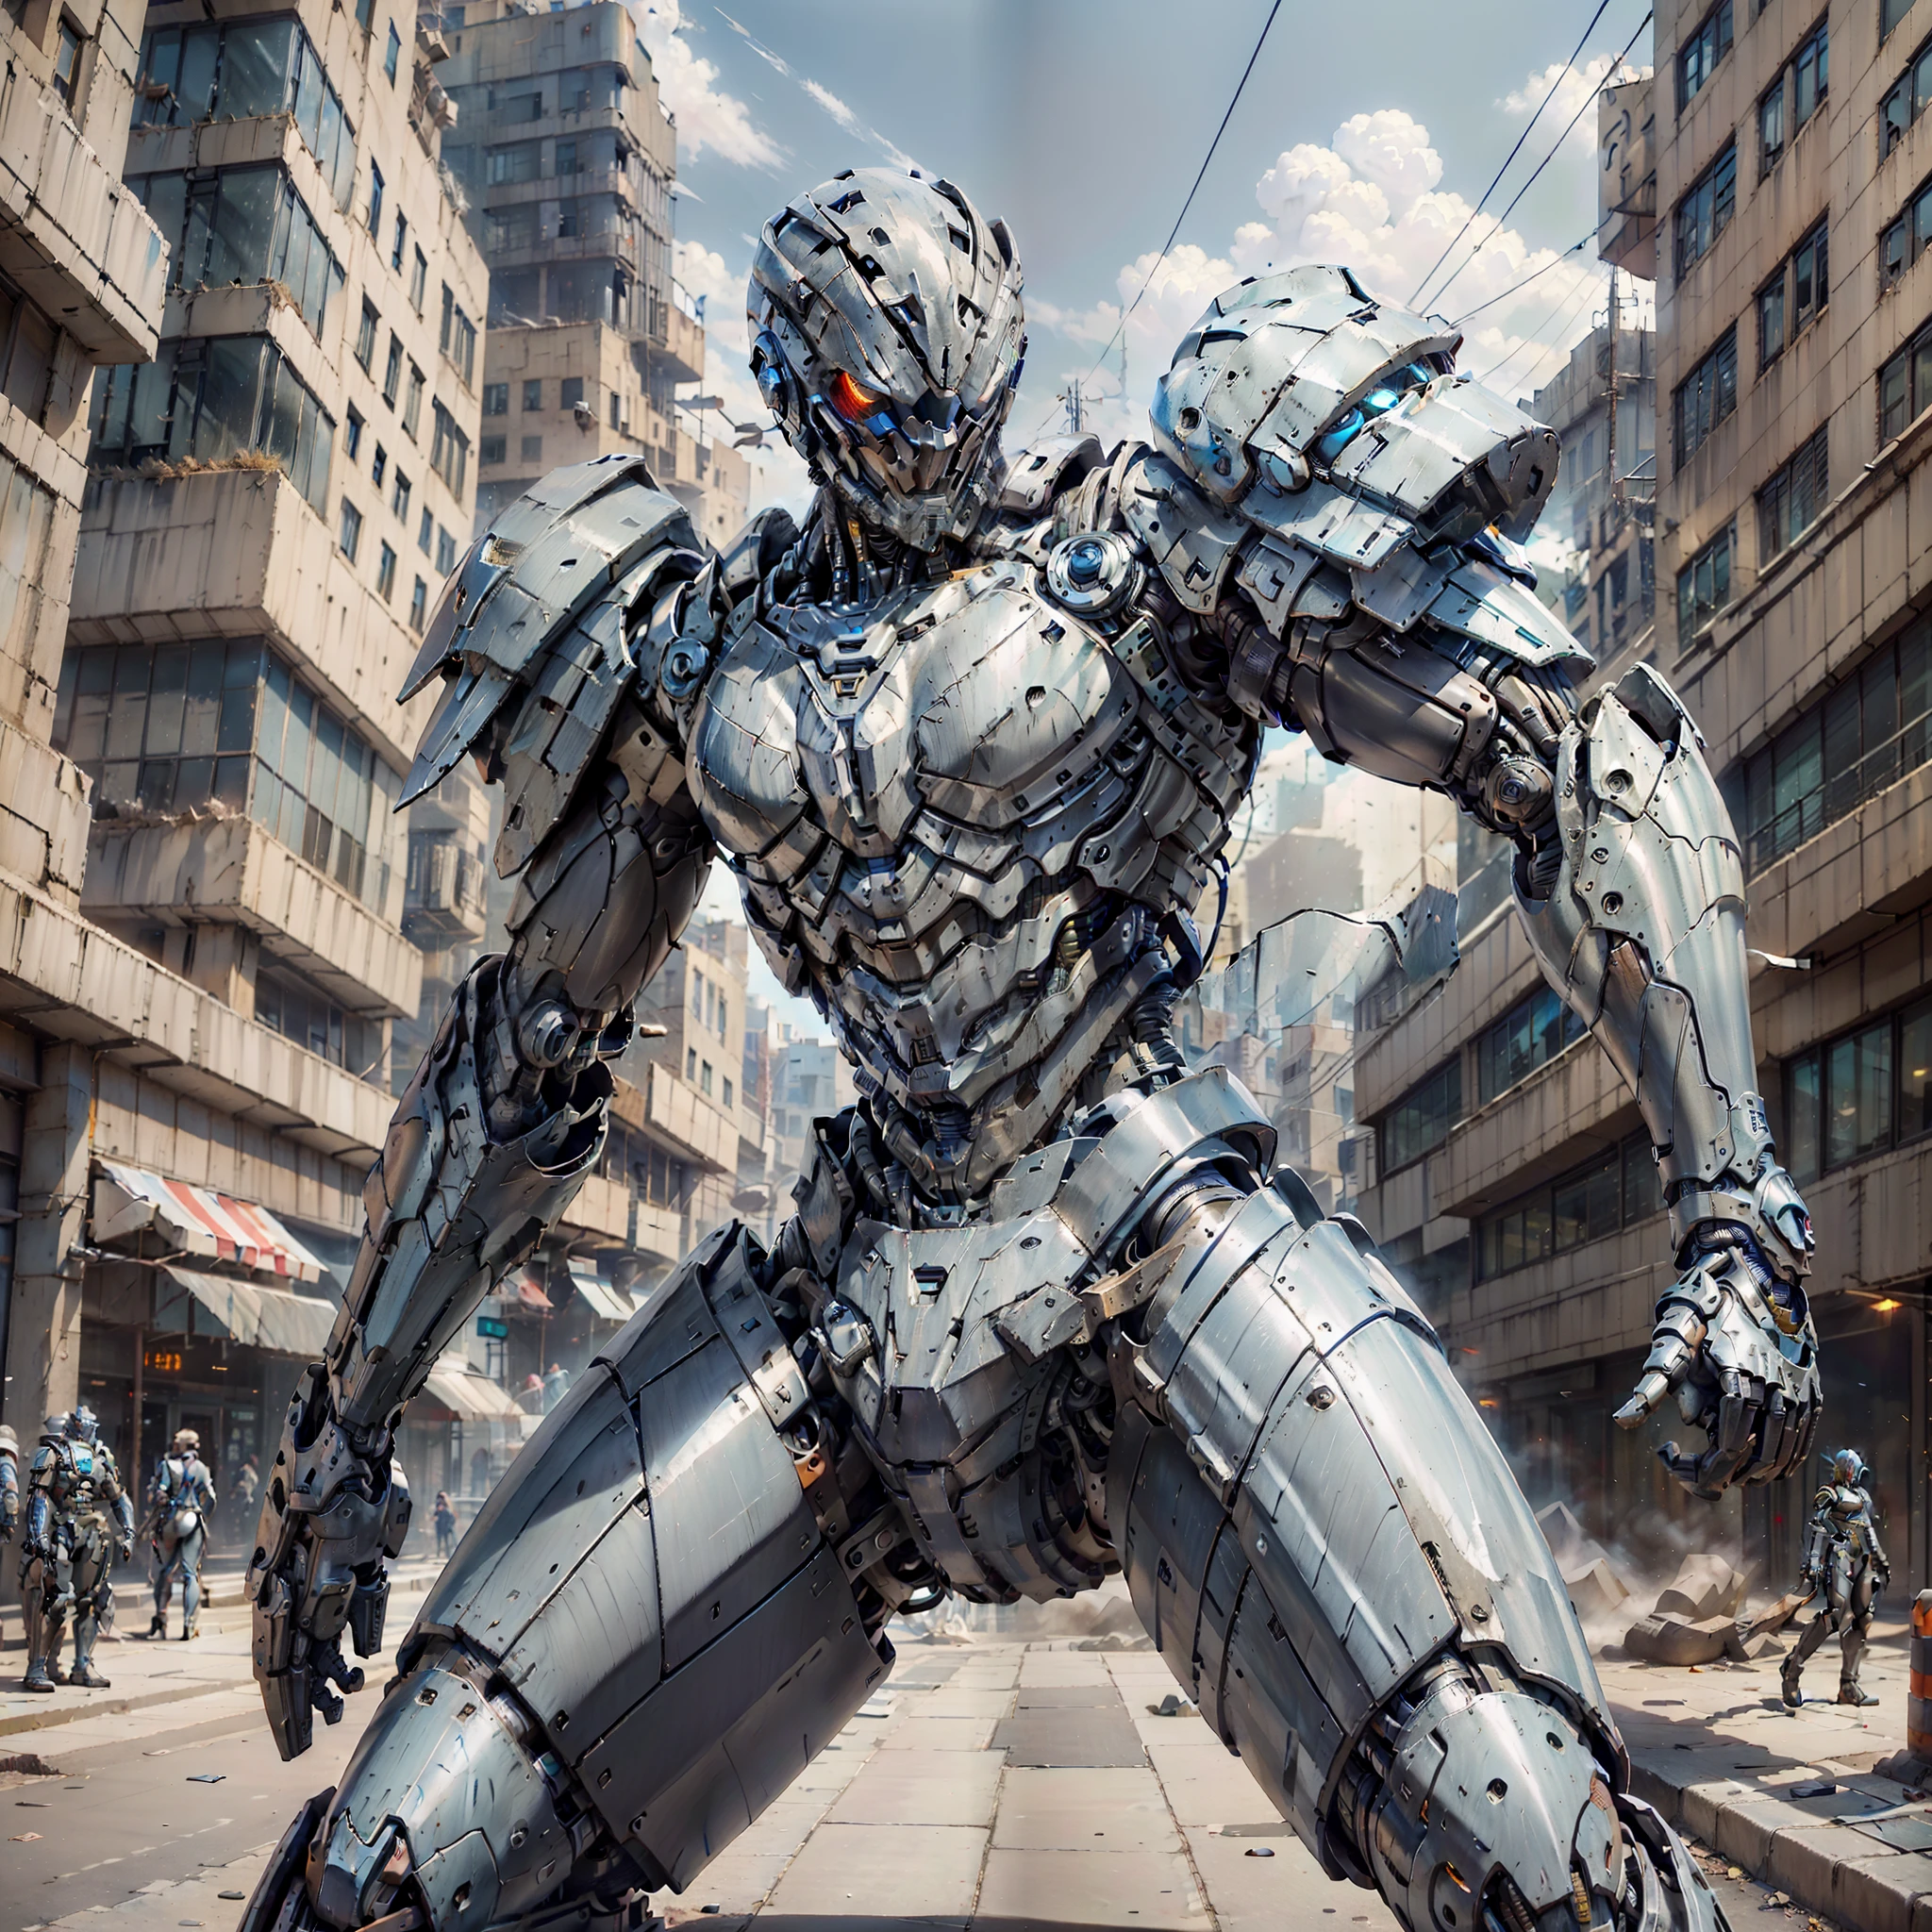 Wearing a shabby mech suit, intricate, (steel metal [rusty]), elegant and clear focus, (masterpiece, best image quality, super fine, Gig Lutovsky style), high quality rendered images, clever rendering angles, soft lighting, bright colors, (city street) theme, dynamic cowboy shooting, dynamic stance.